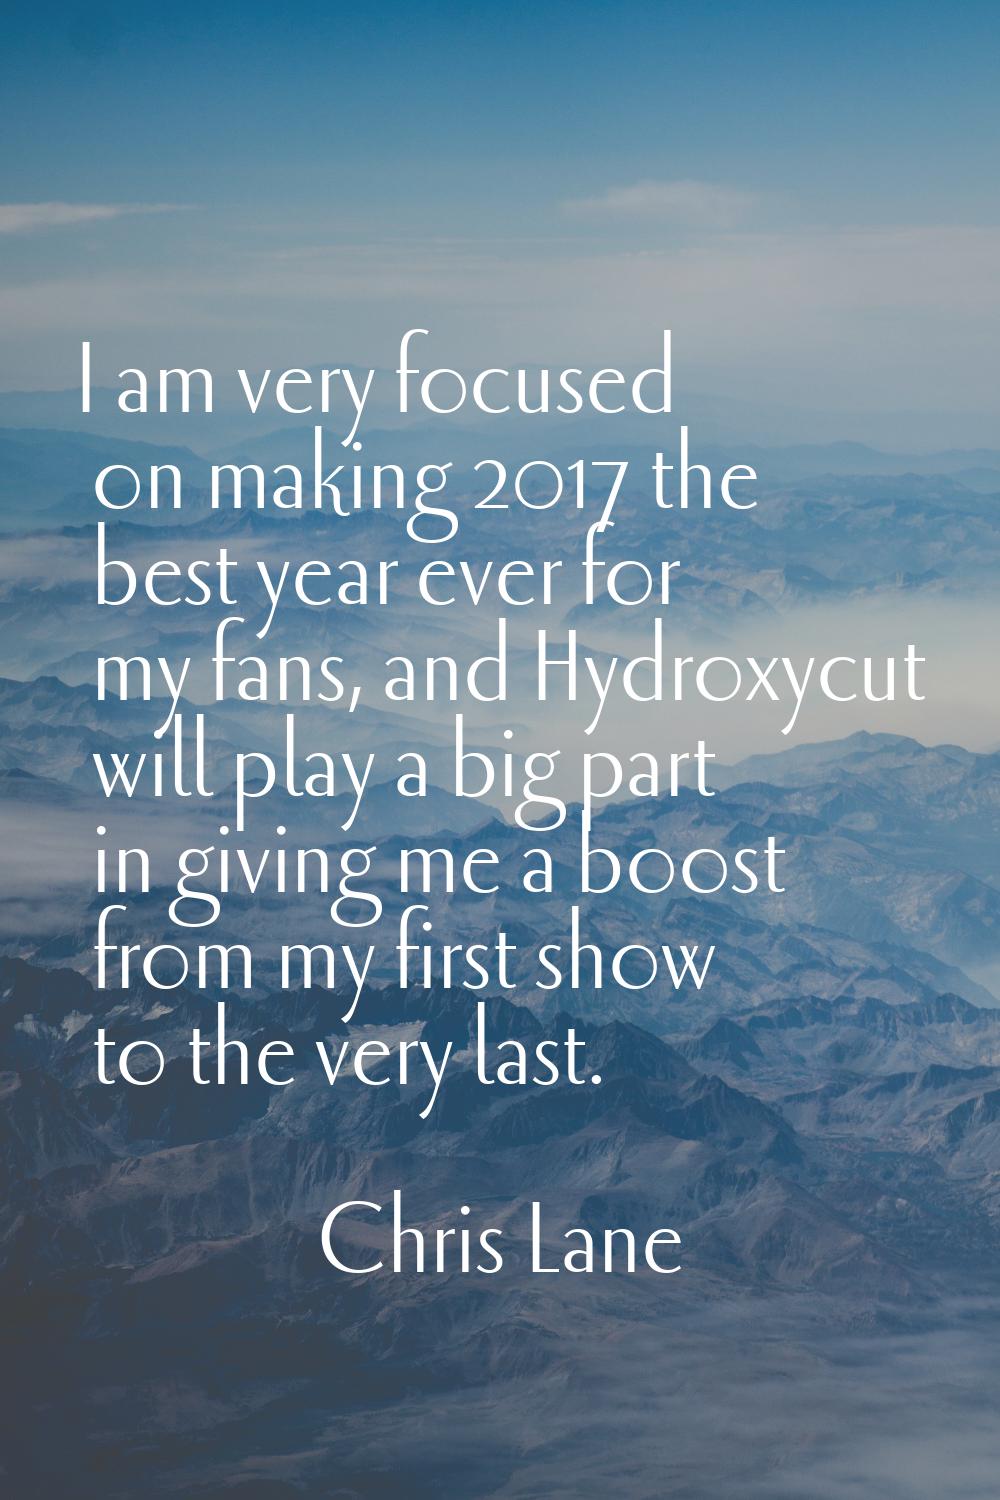 I am very focused on making 2017 the best year ever for my fans, and Hydroxycut will play a big par